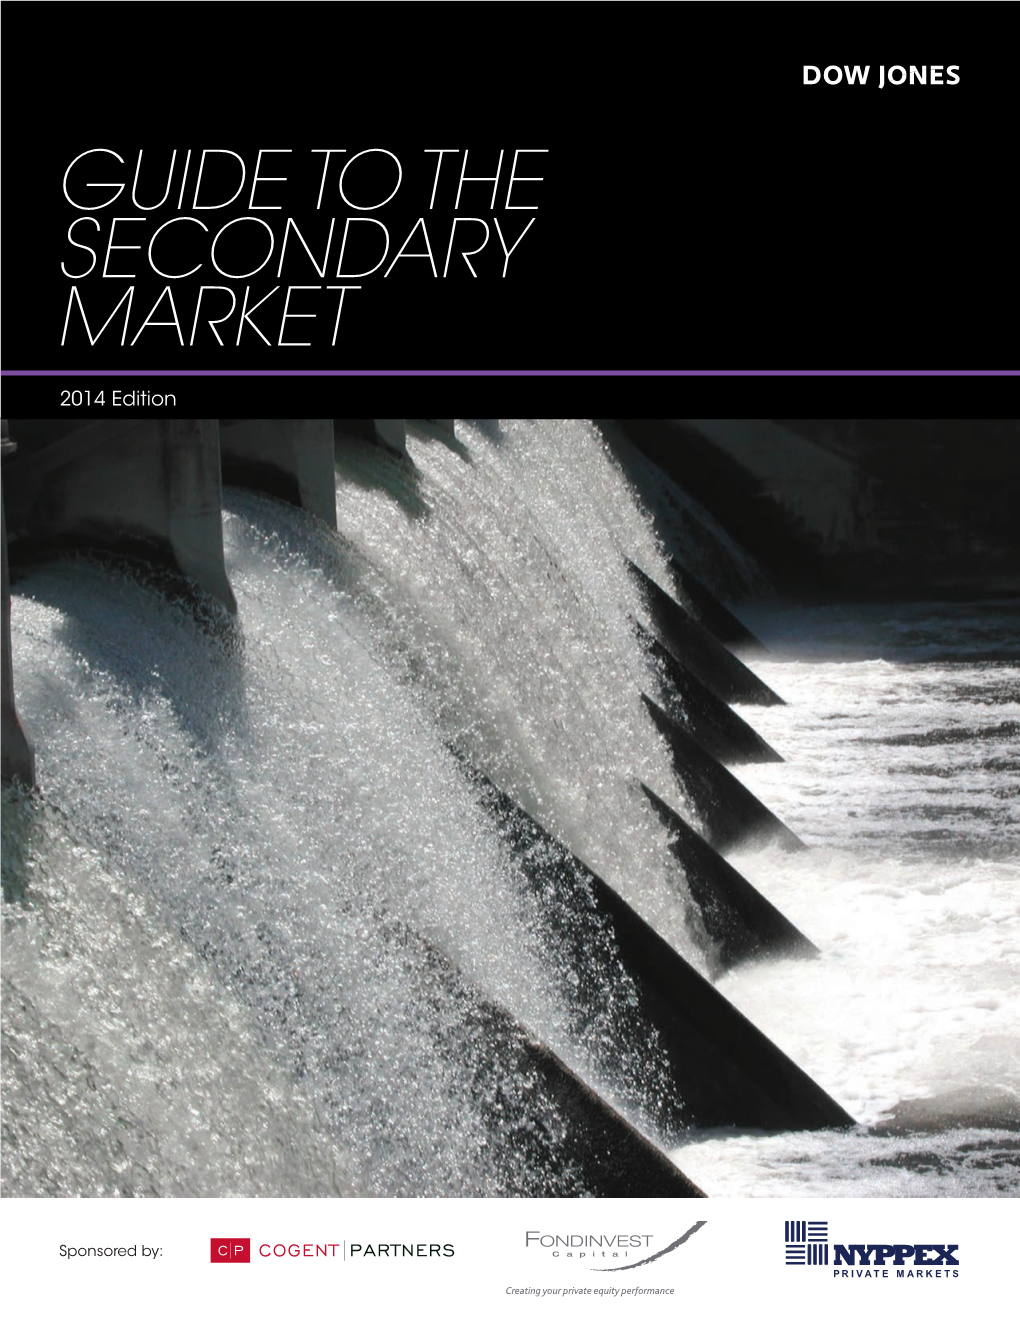 Guide to the Secondary Market